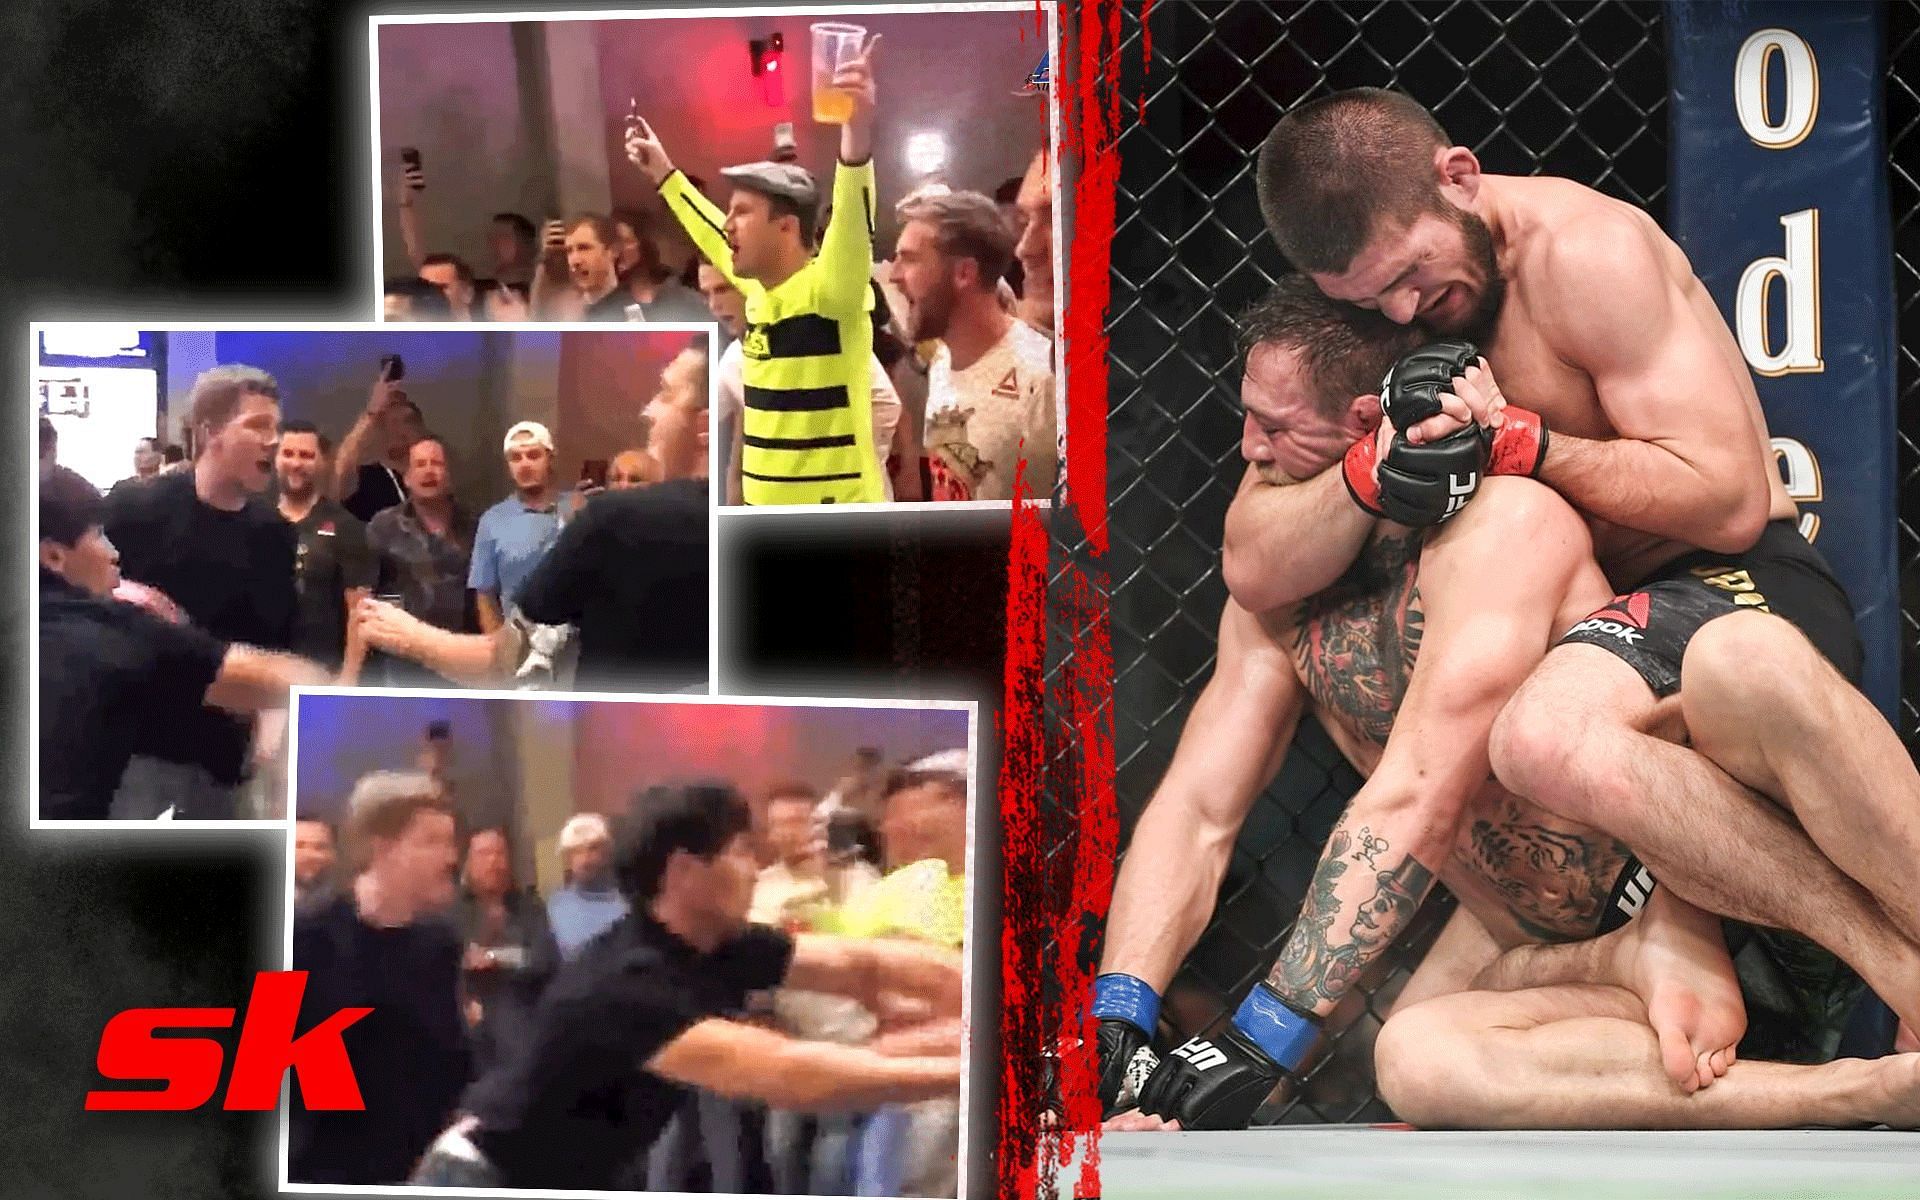 Fans brawling after UFC 229 (left) and Khabib Nurmagomedov choking Conor McGregor (right). [Images courtesy: left images from Twitter @oocmma and right image from Instagram @ufc]